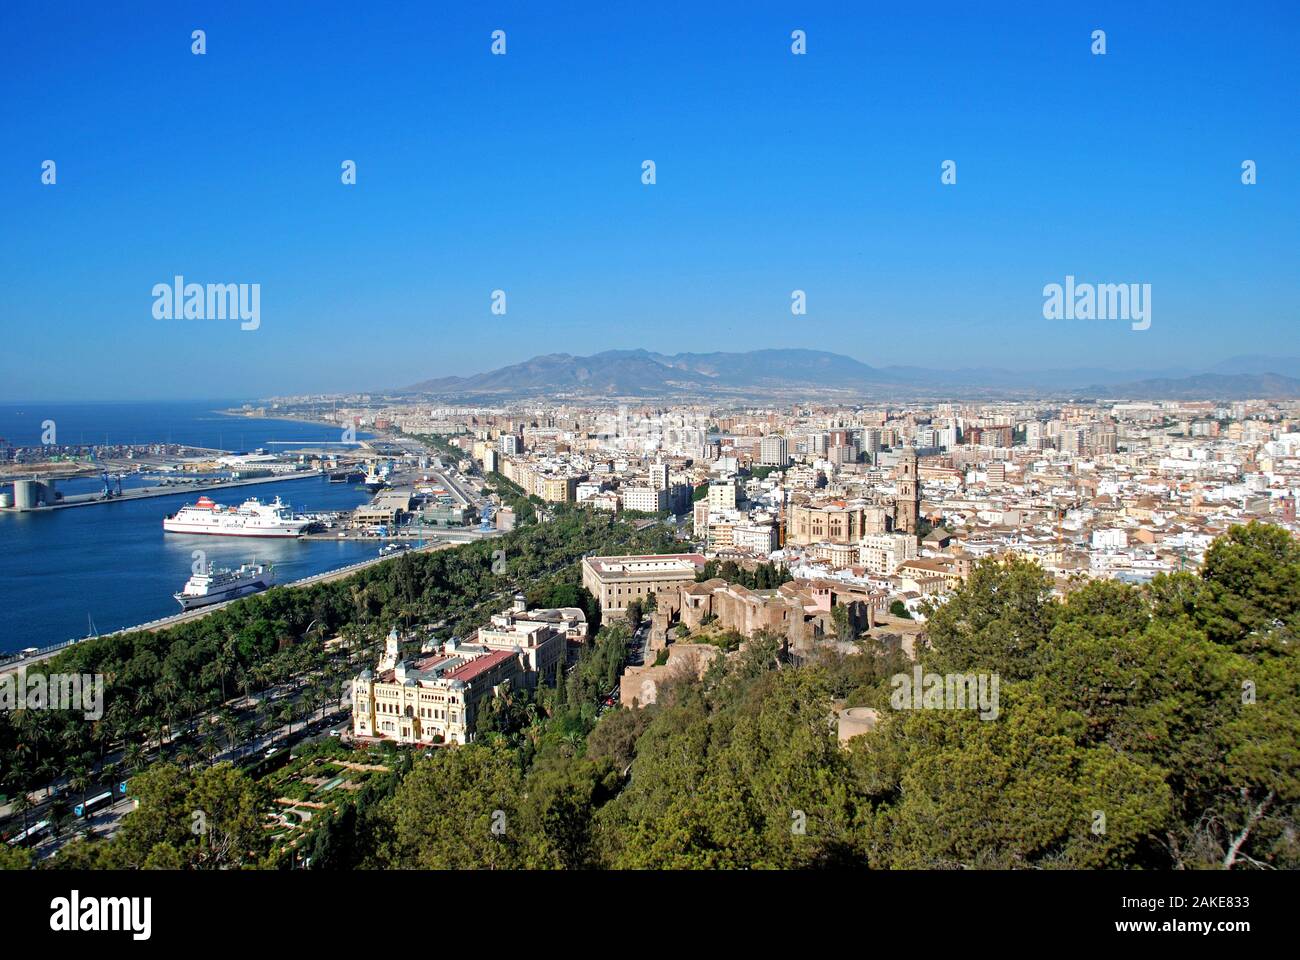 Elevated view of the harbour and city with the former city hall and parts of the castle in the foreground, Malaga, Spain. Stock Photo